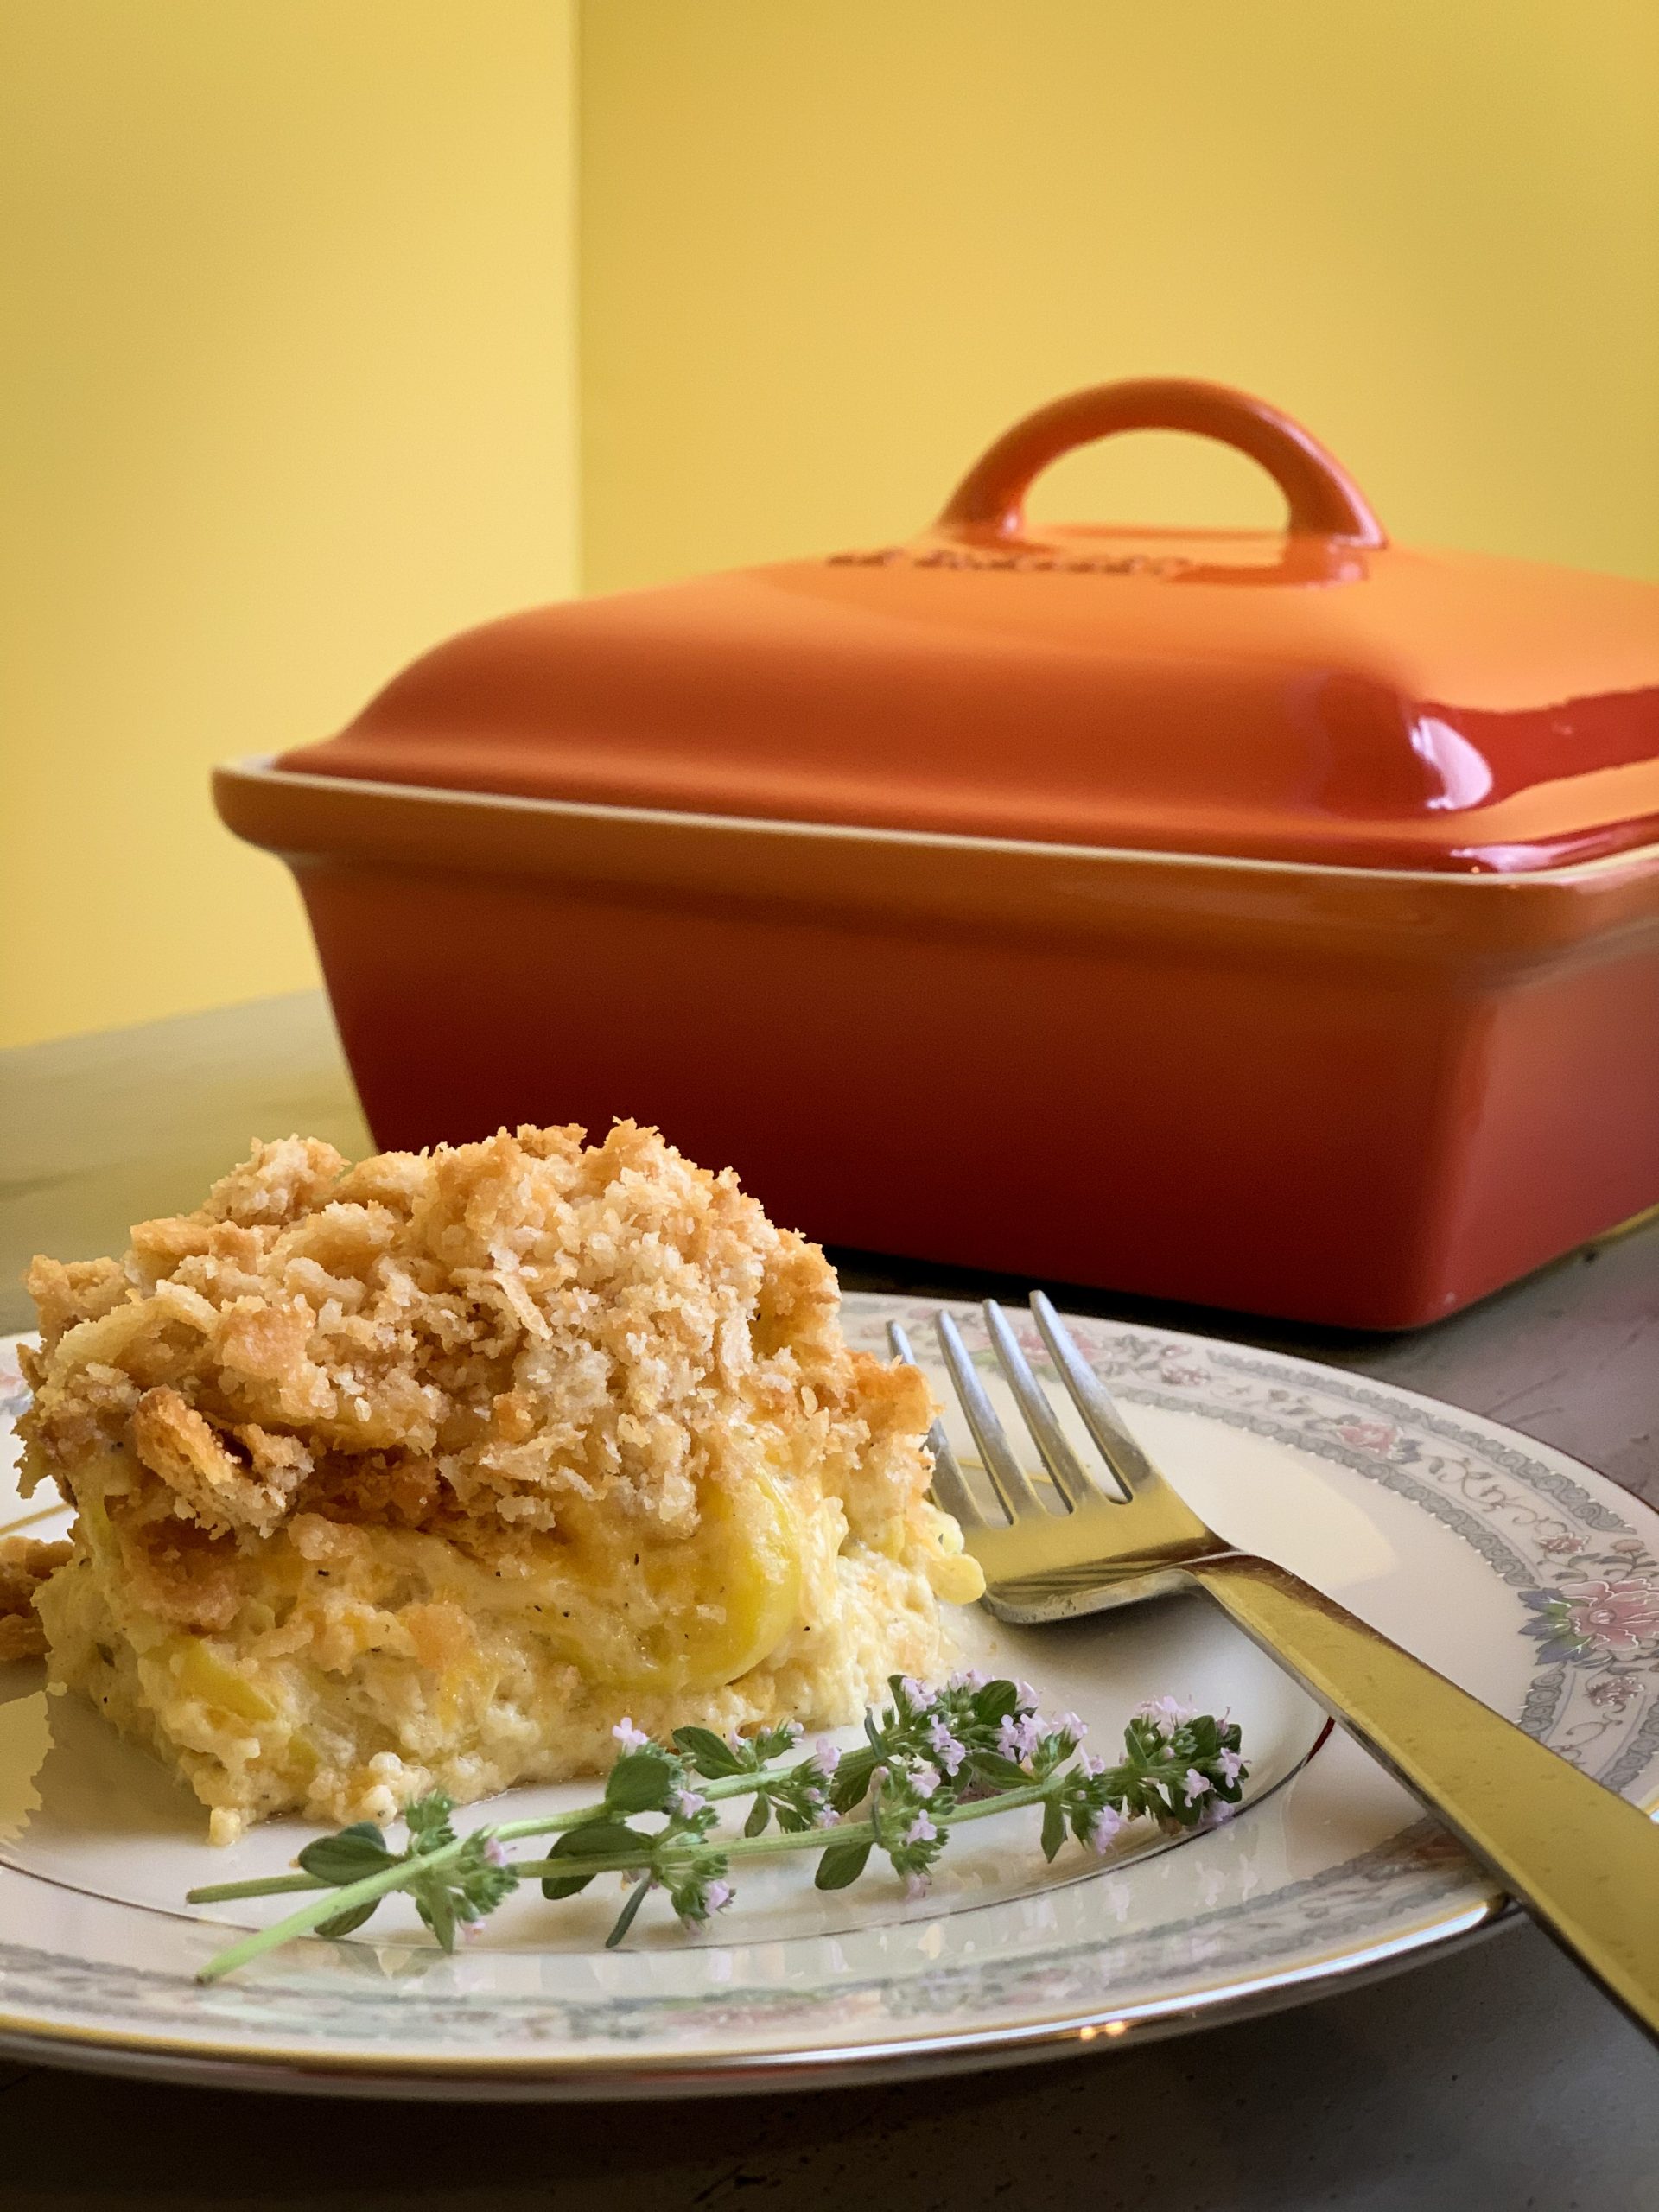 https://www.thisgalcooks.com/wp-content/uploads/2021/05/one-helping-of-squash-casserole-with-le-creuset-casserole-dish-scaled.jpg